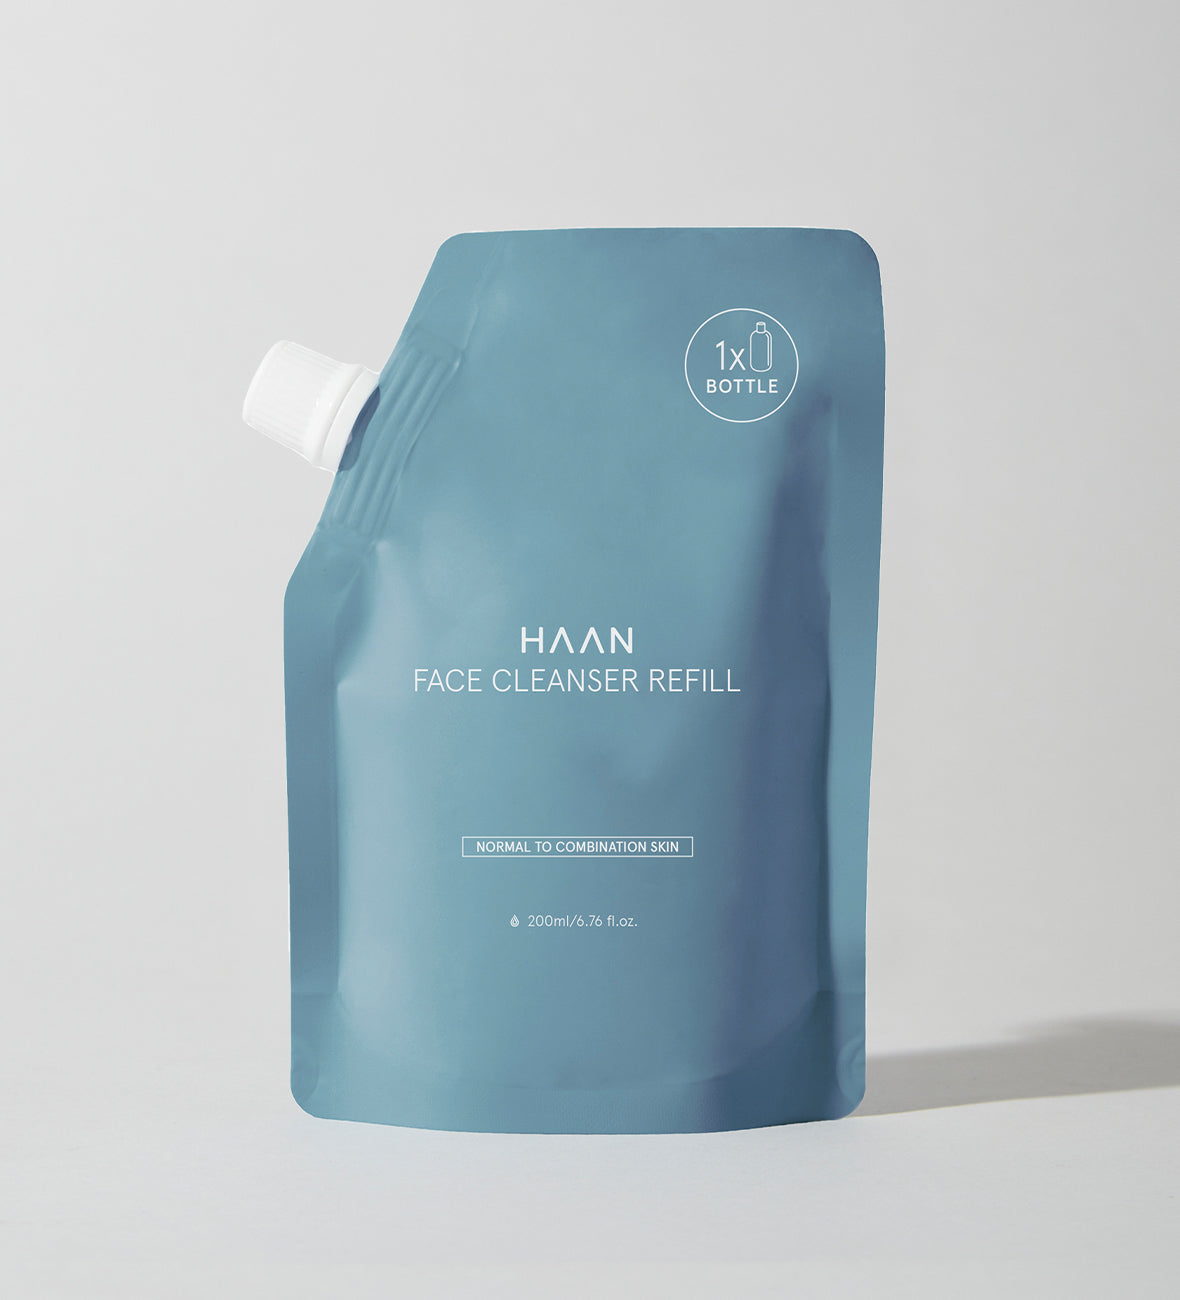 HAAN FACE CLEANSER REFILL | Normal to Combination Skin